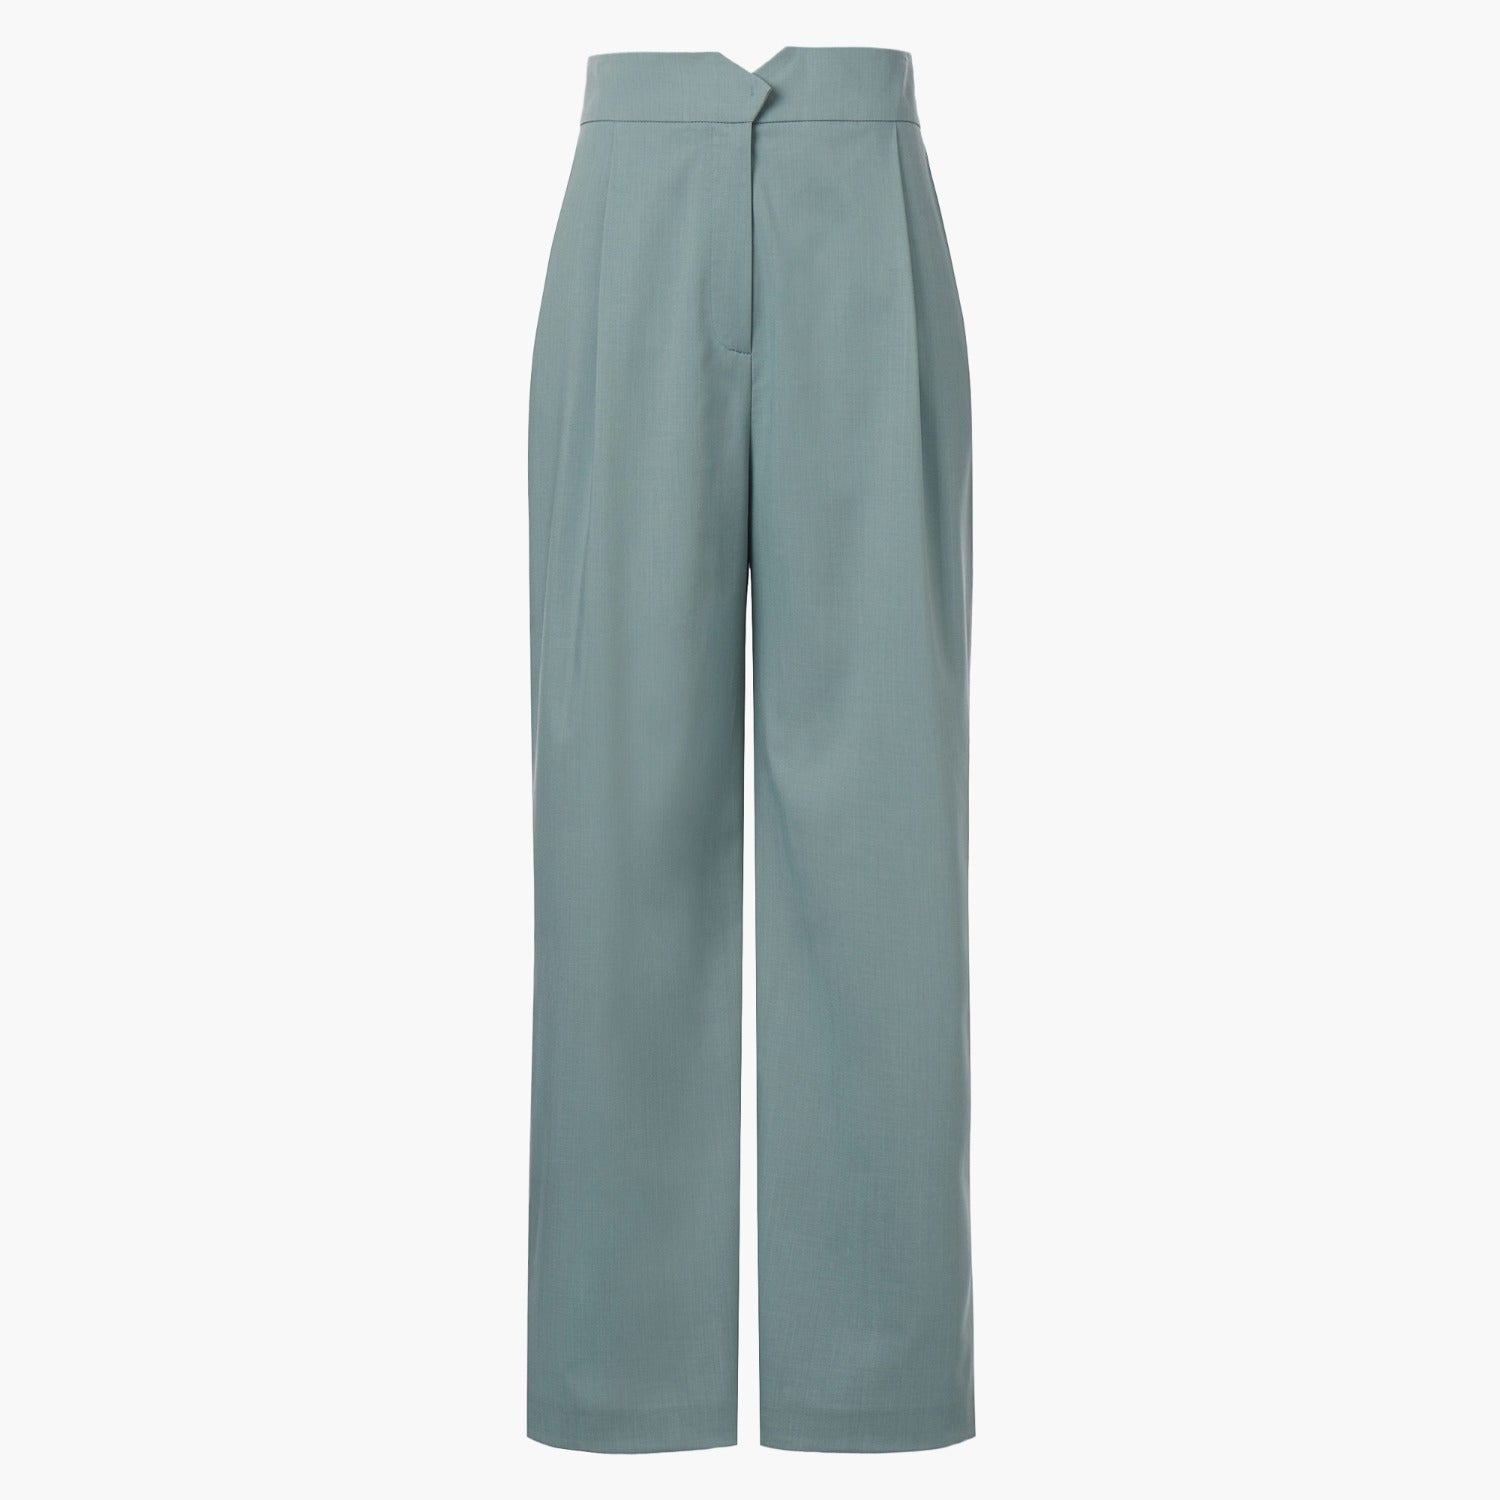 HIGH-RISE BELT DETAIL TROUSERS - LINGER GALLERY